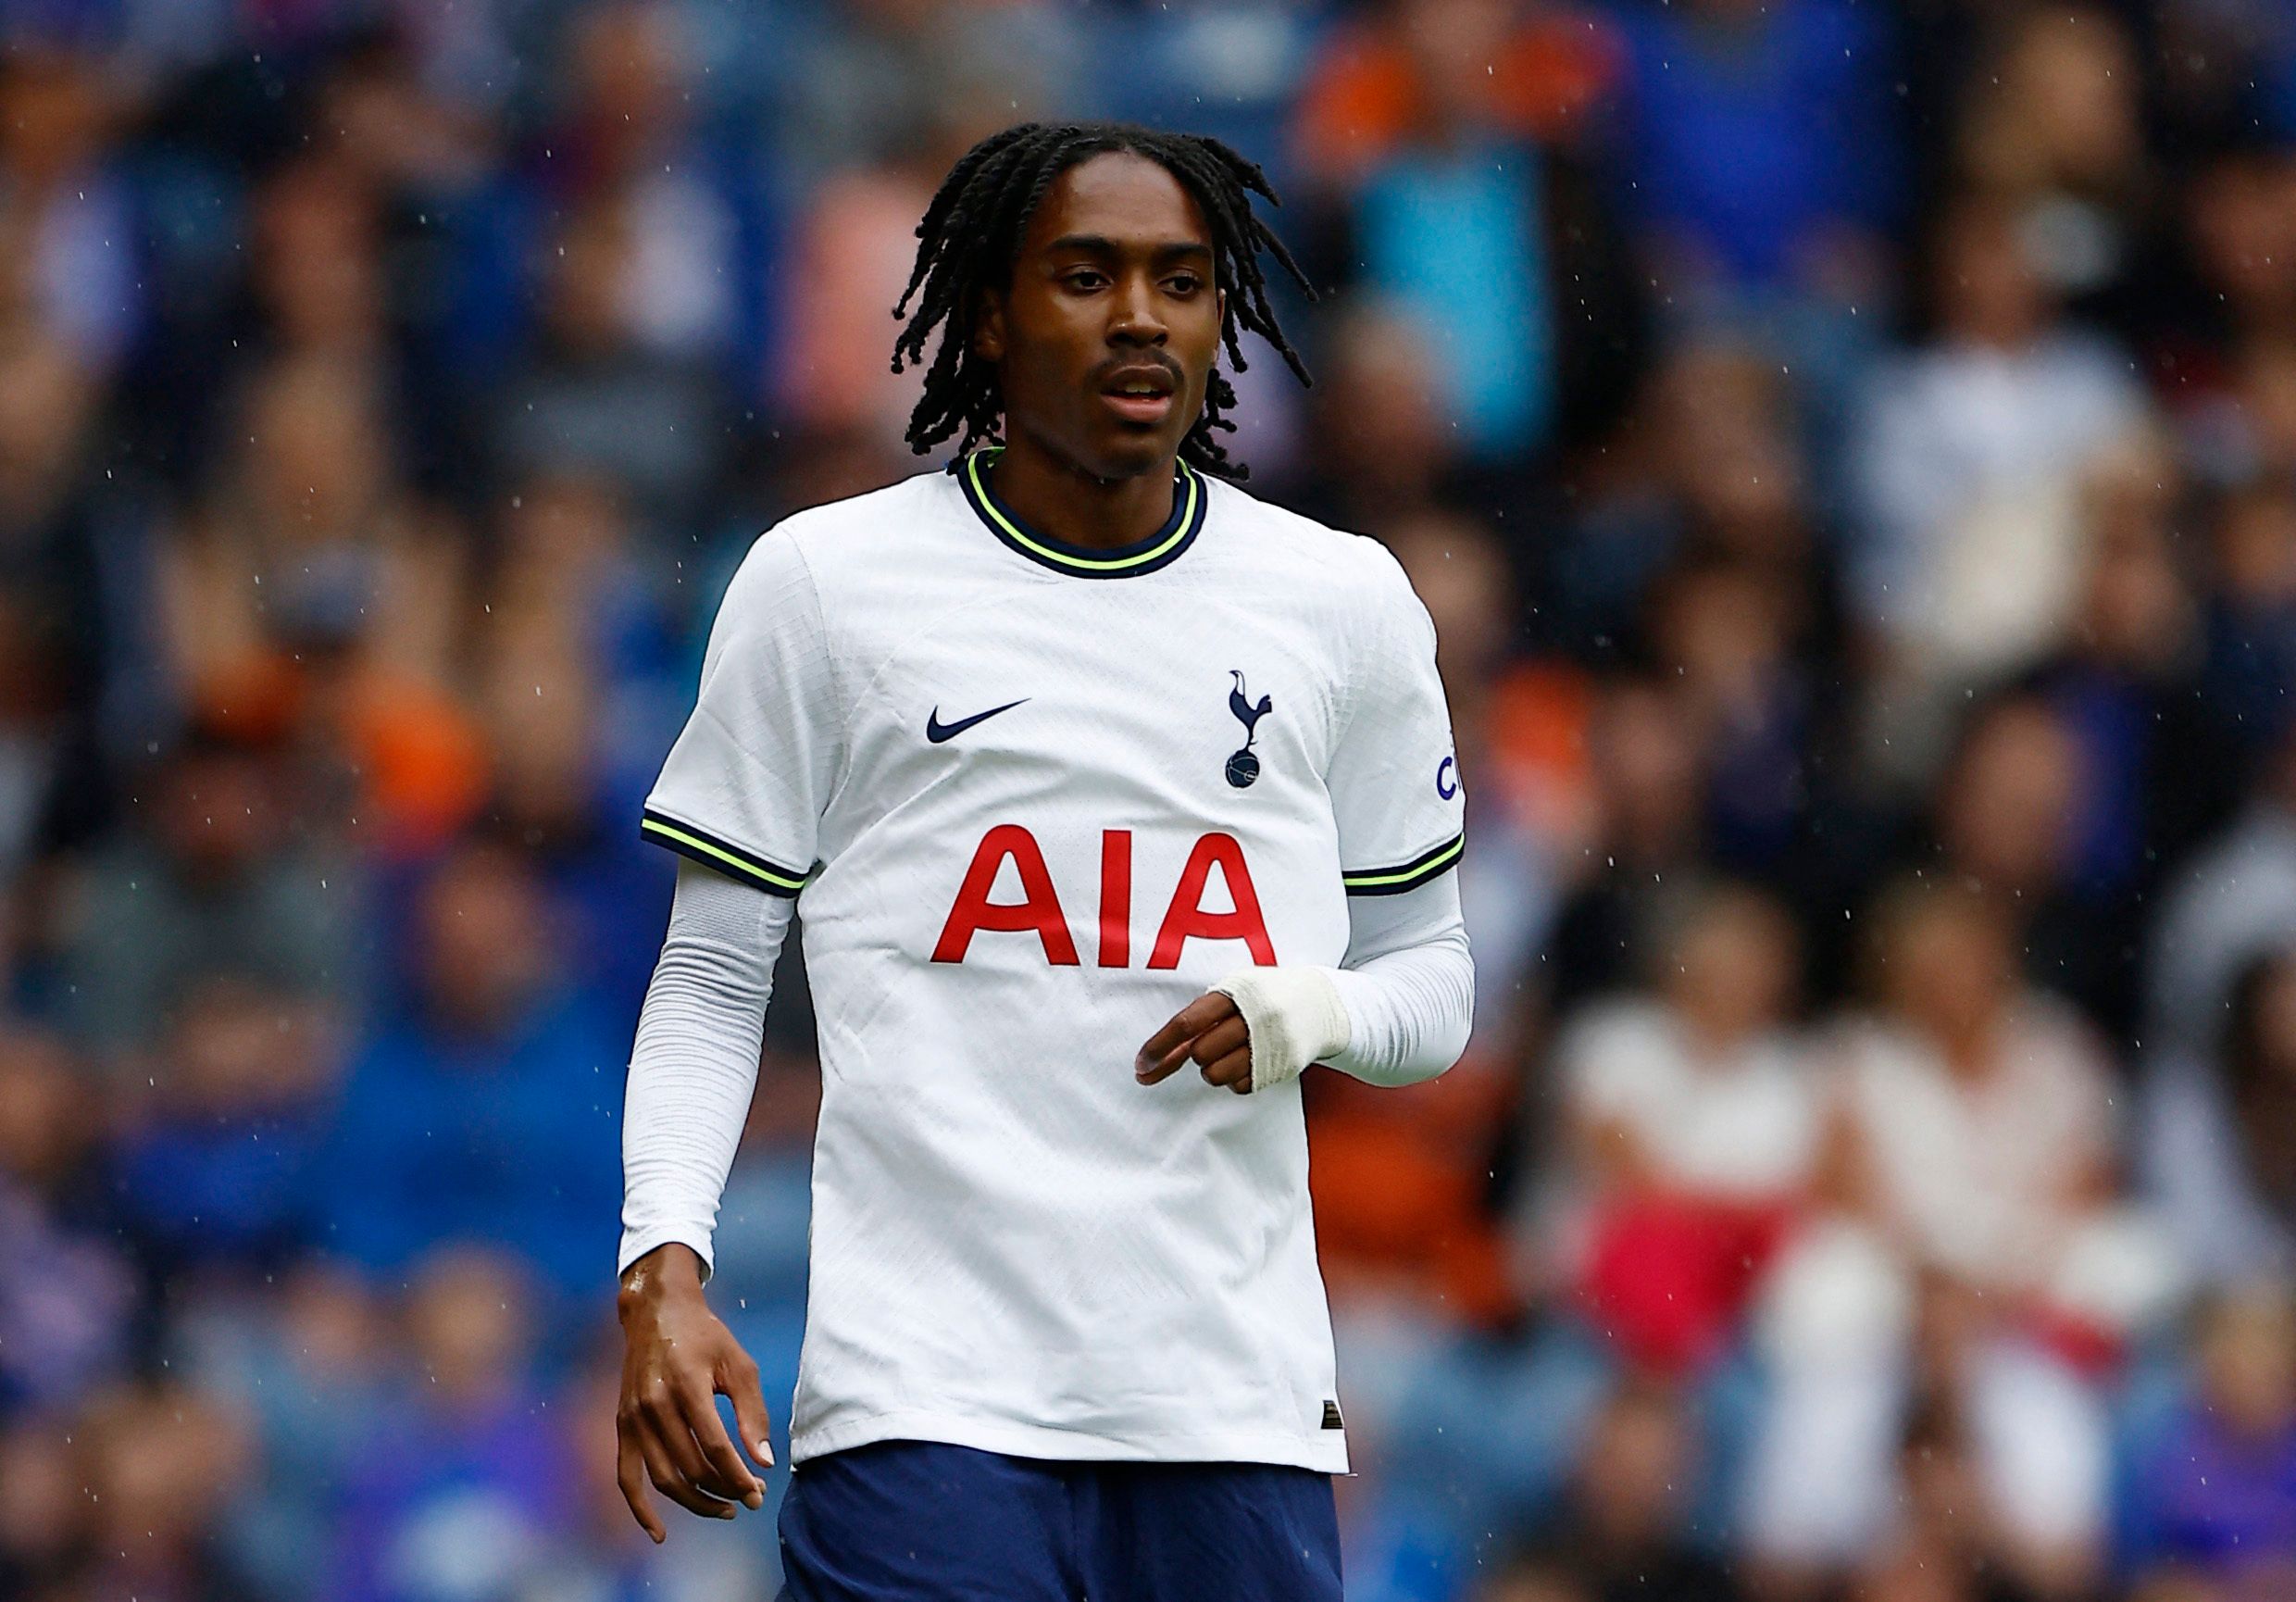 Tottenham: Djed Spence will not play in Emerson Royal’s absence, says John Wenham -Premier League News